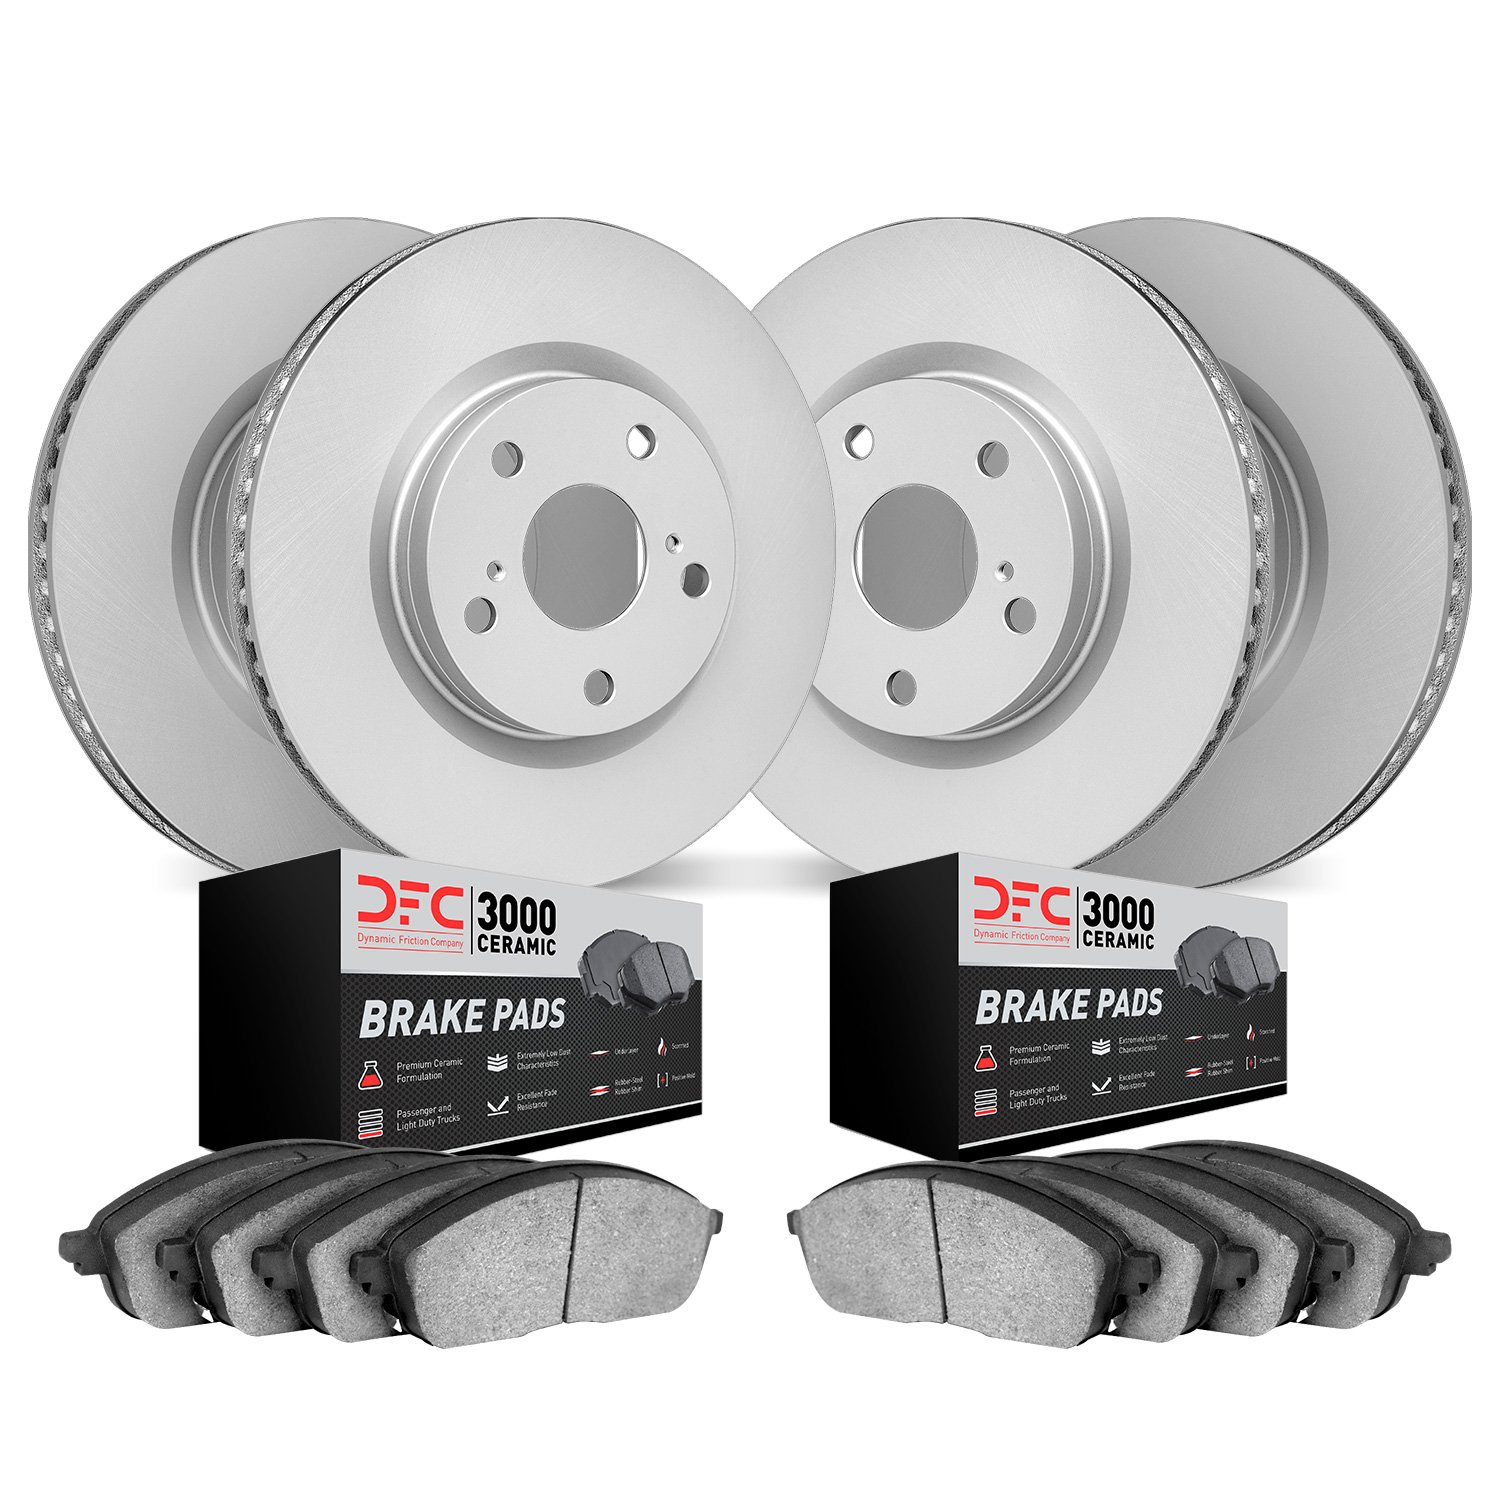 4304-75017 Geospec Brake Rotors with 3000-Series Ceramic Brake Pads Kit, 2013-2020 Lexus/Toyota/Scion, Position: Front and Rear